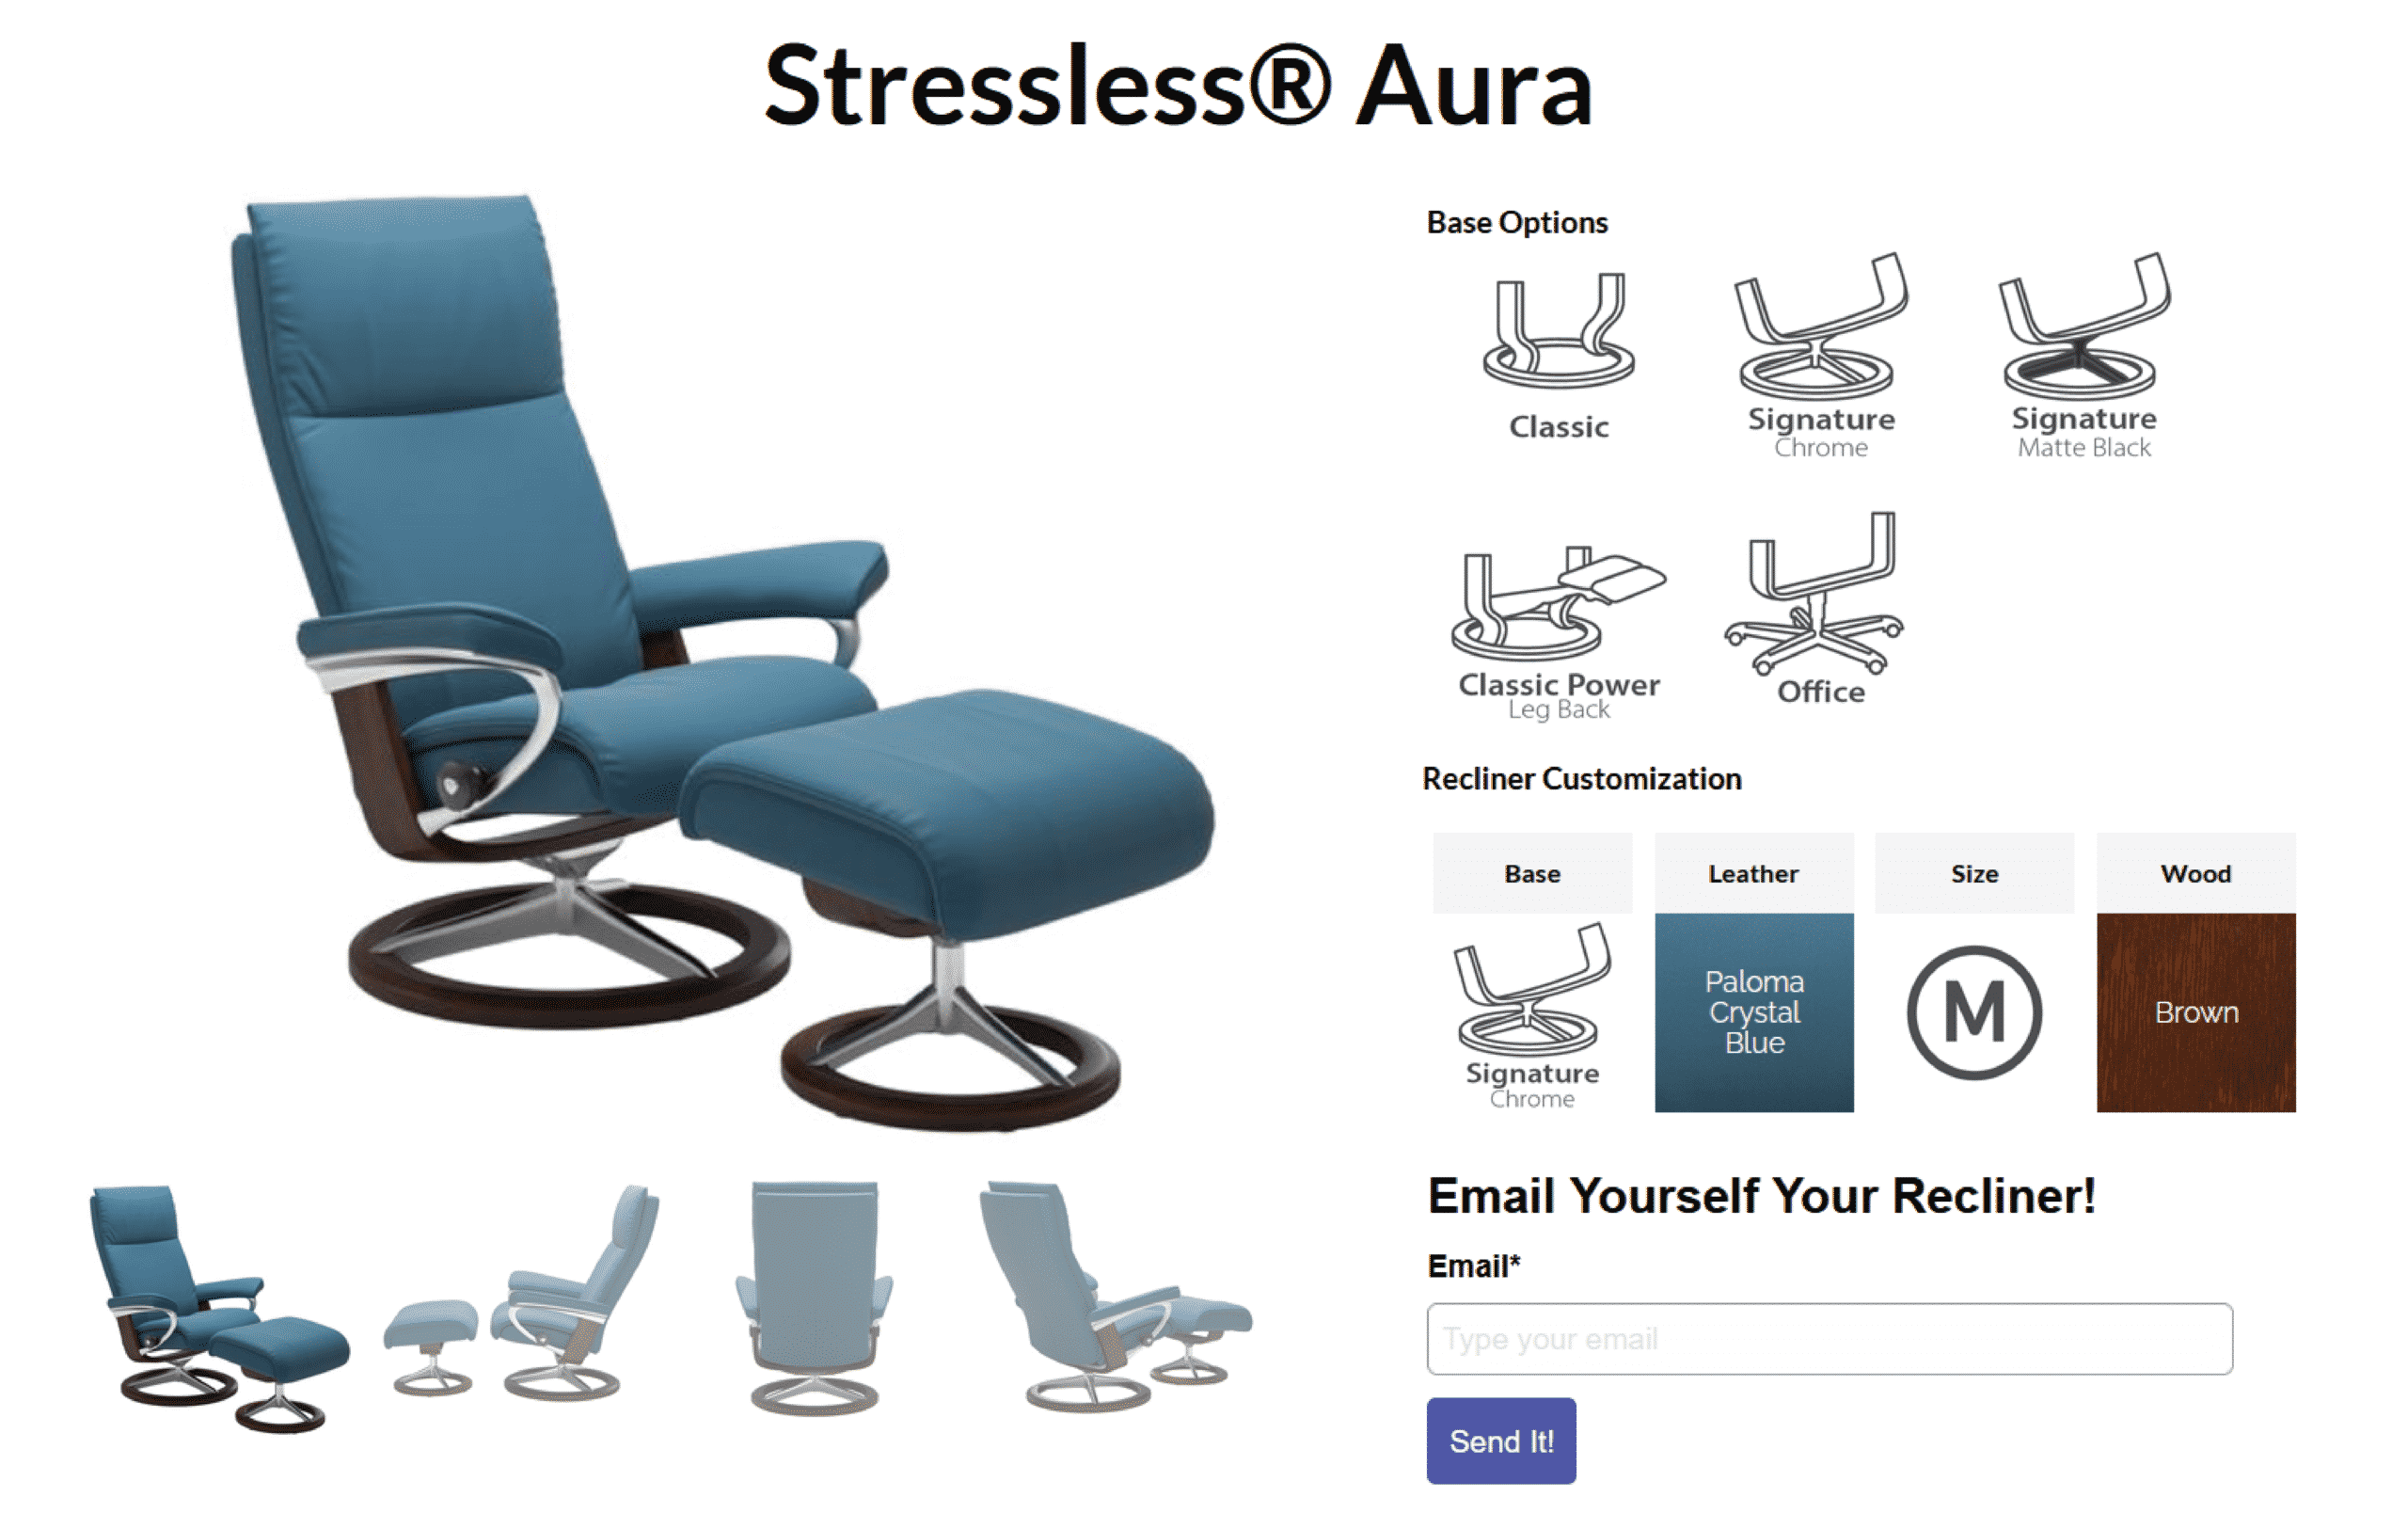 Build Your Own Stressless Aura-01